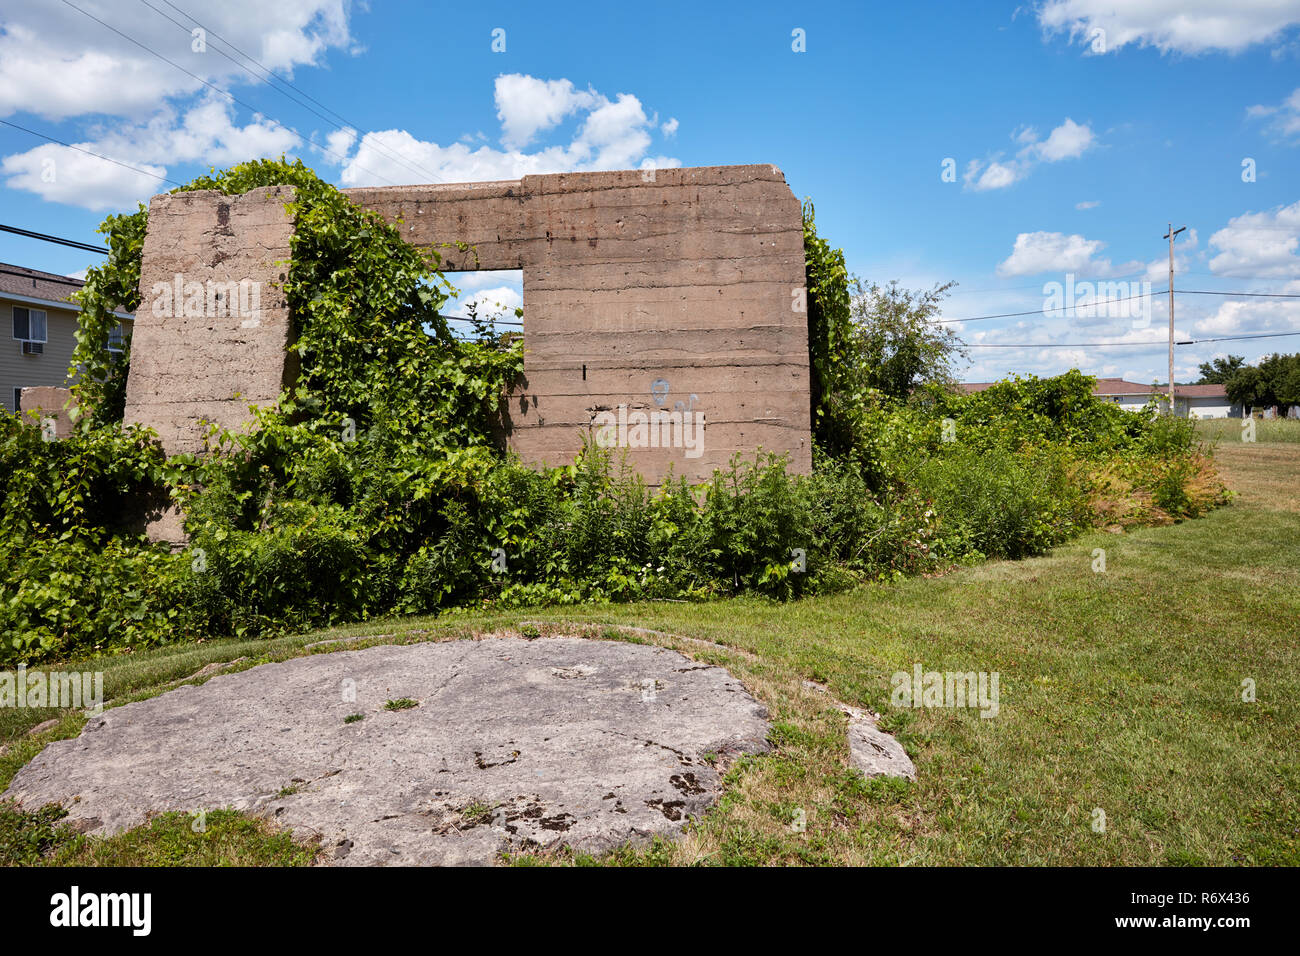 Ruins of the Ardis Furnace, an abandoned experimental blast furnace in Iron Mountain, Michigan. Designated a Michigan State Historic Site in 1971. Stock Photo